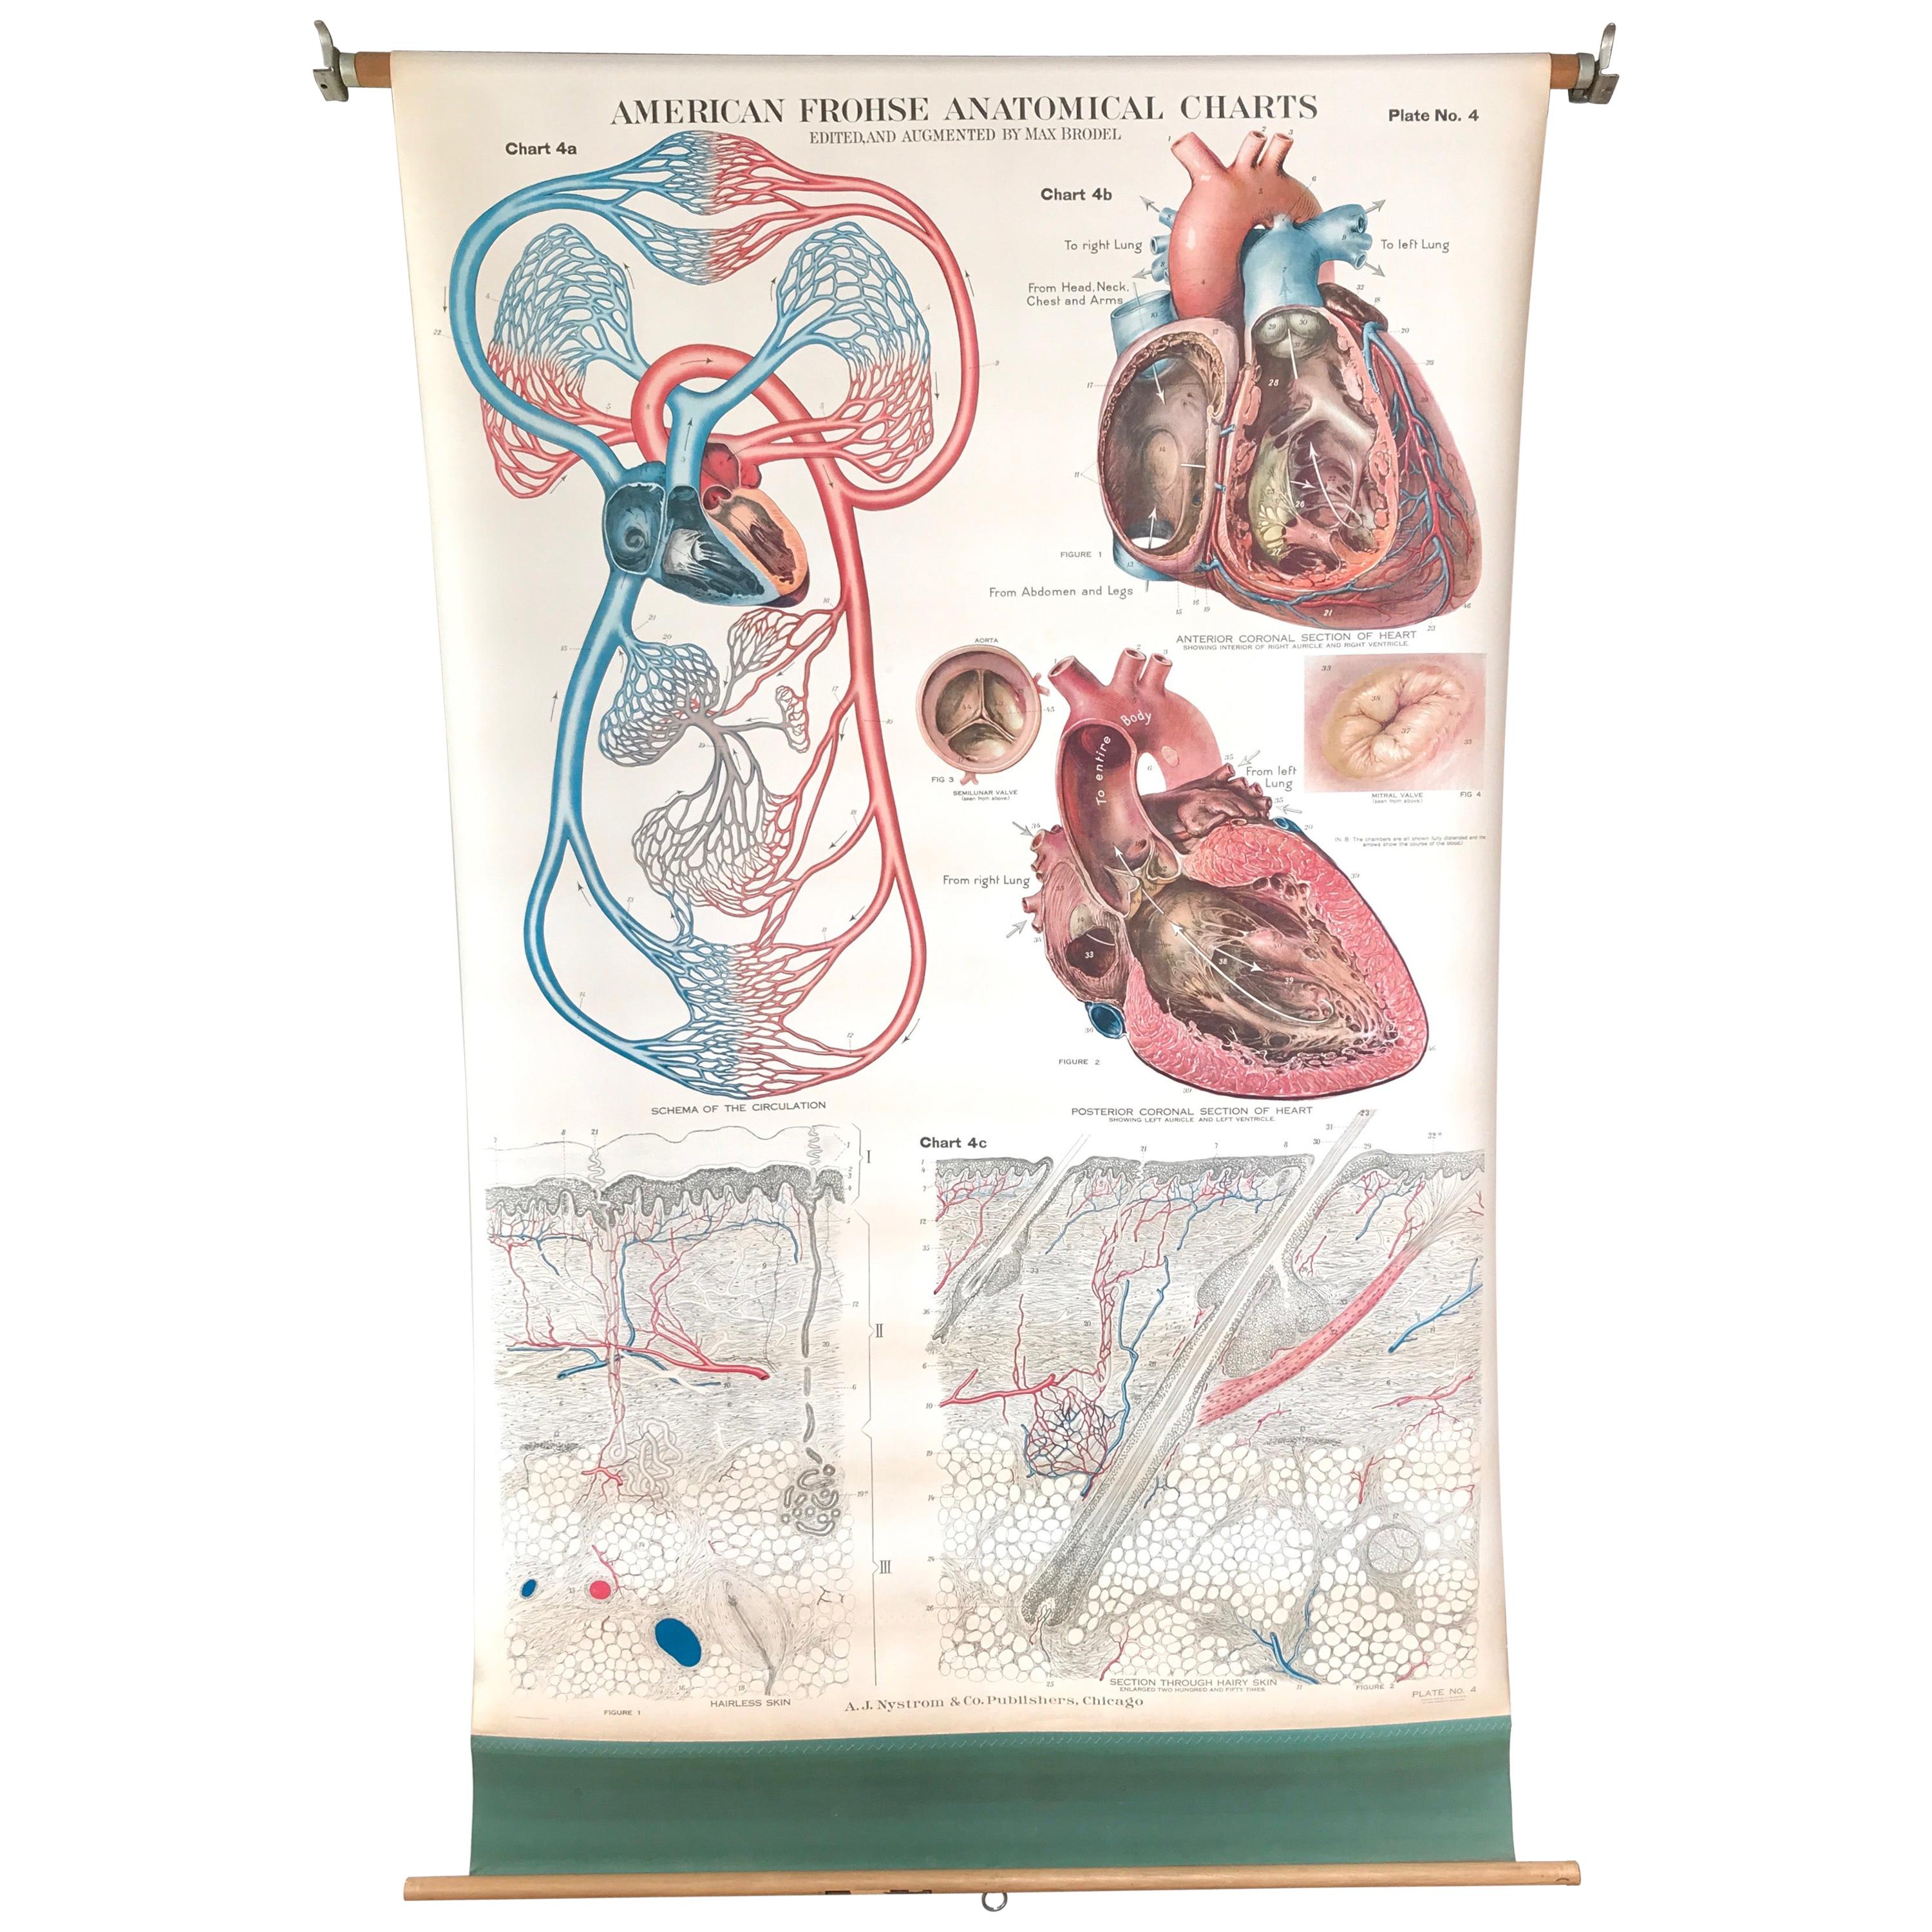 Frohse Anatomical Chart by A.J. Nystrom, Plate No. 4, Circulatory System, 1918